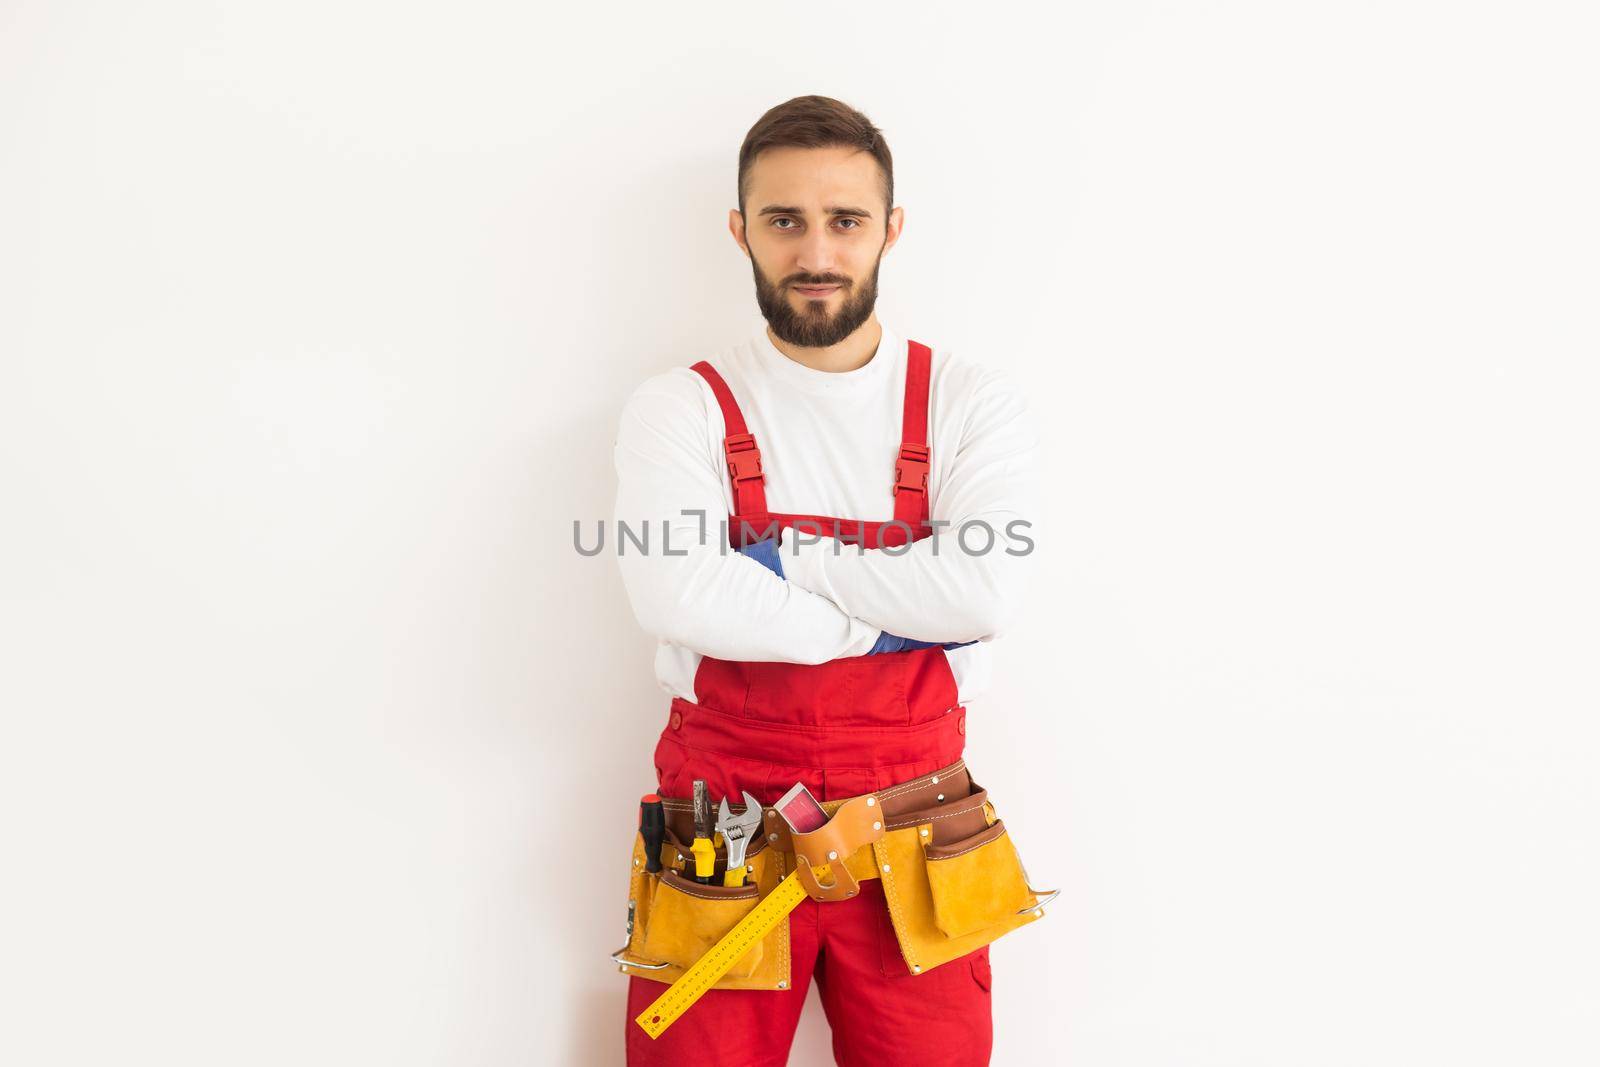 Man builder in a robe, overalls on a white background. Isolate, copy space.